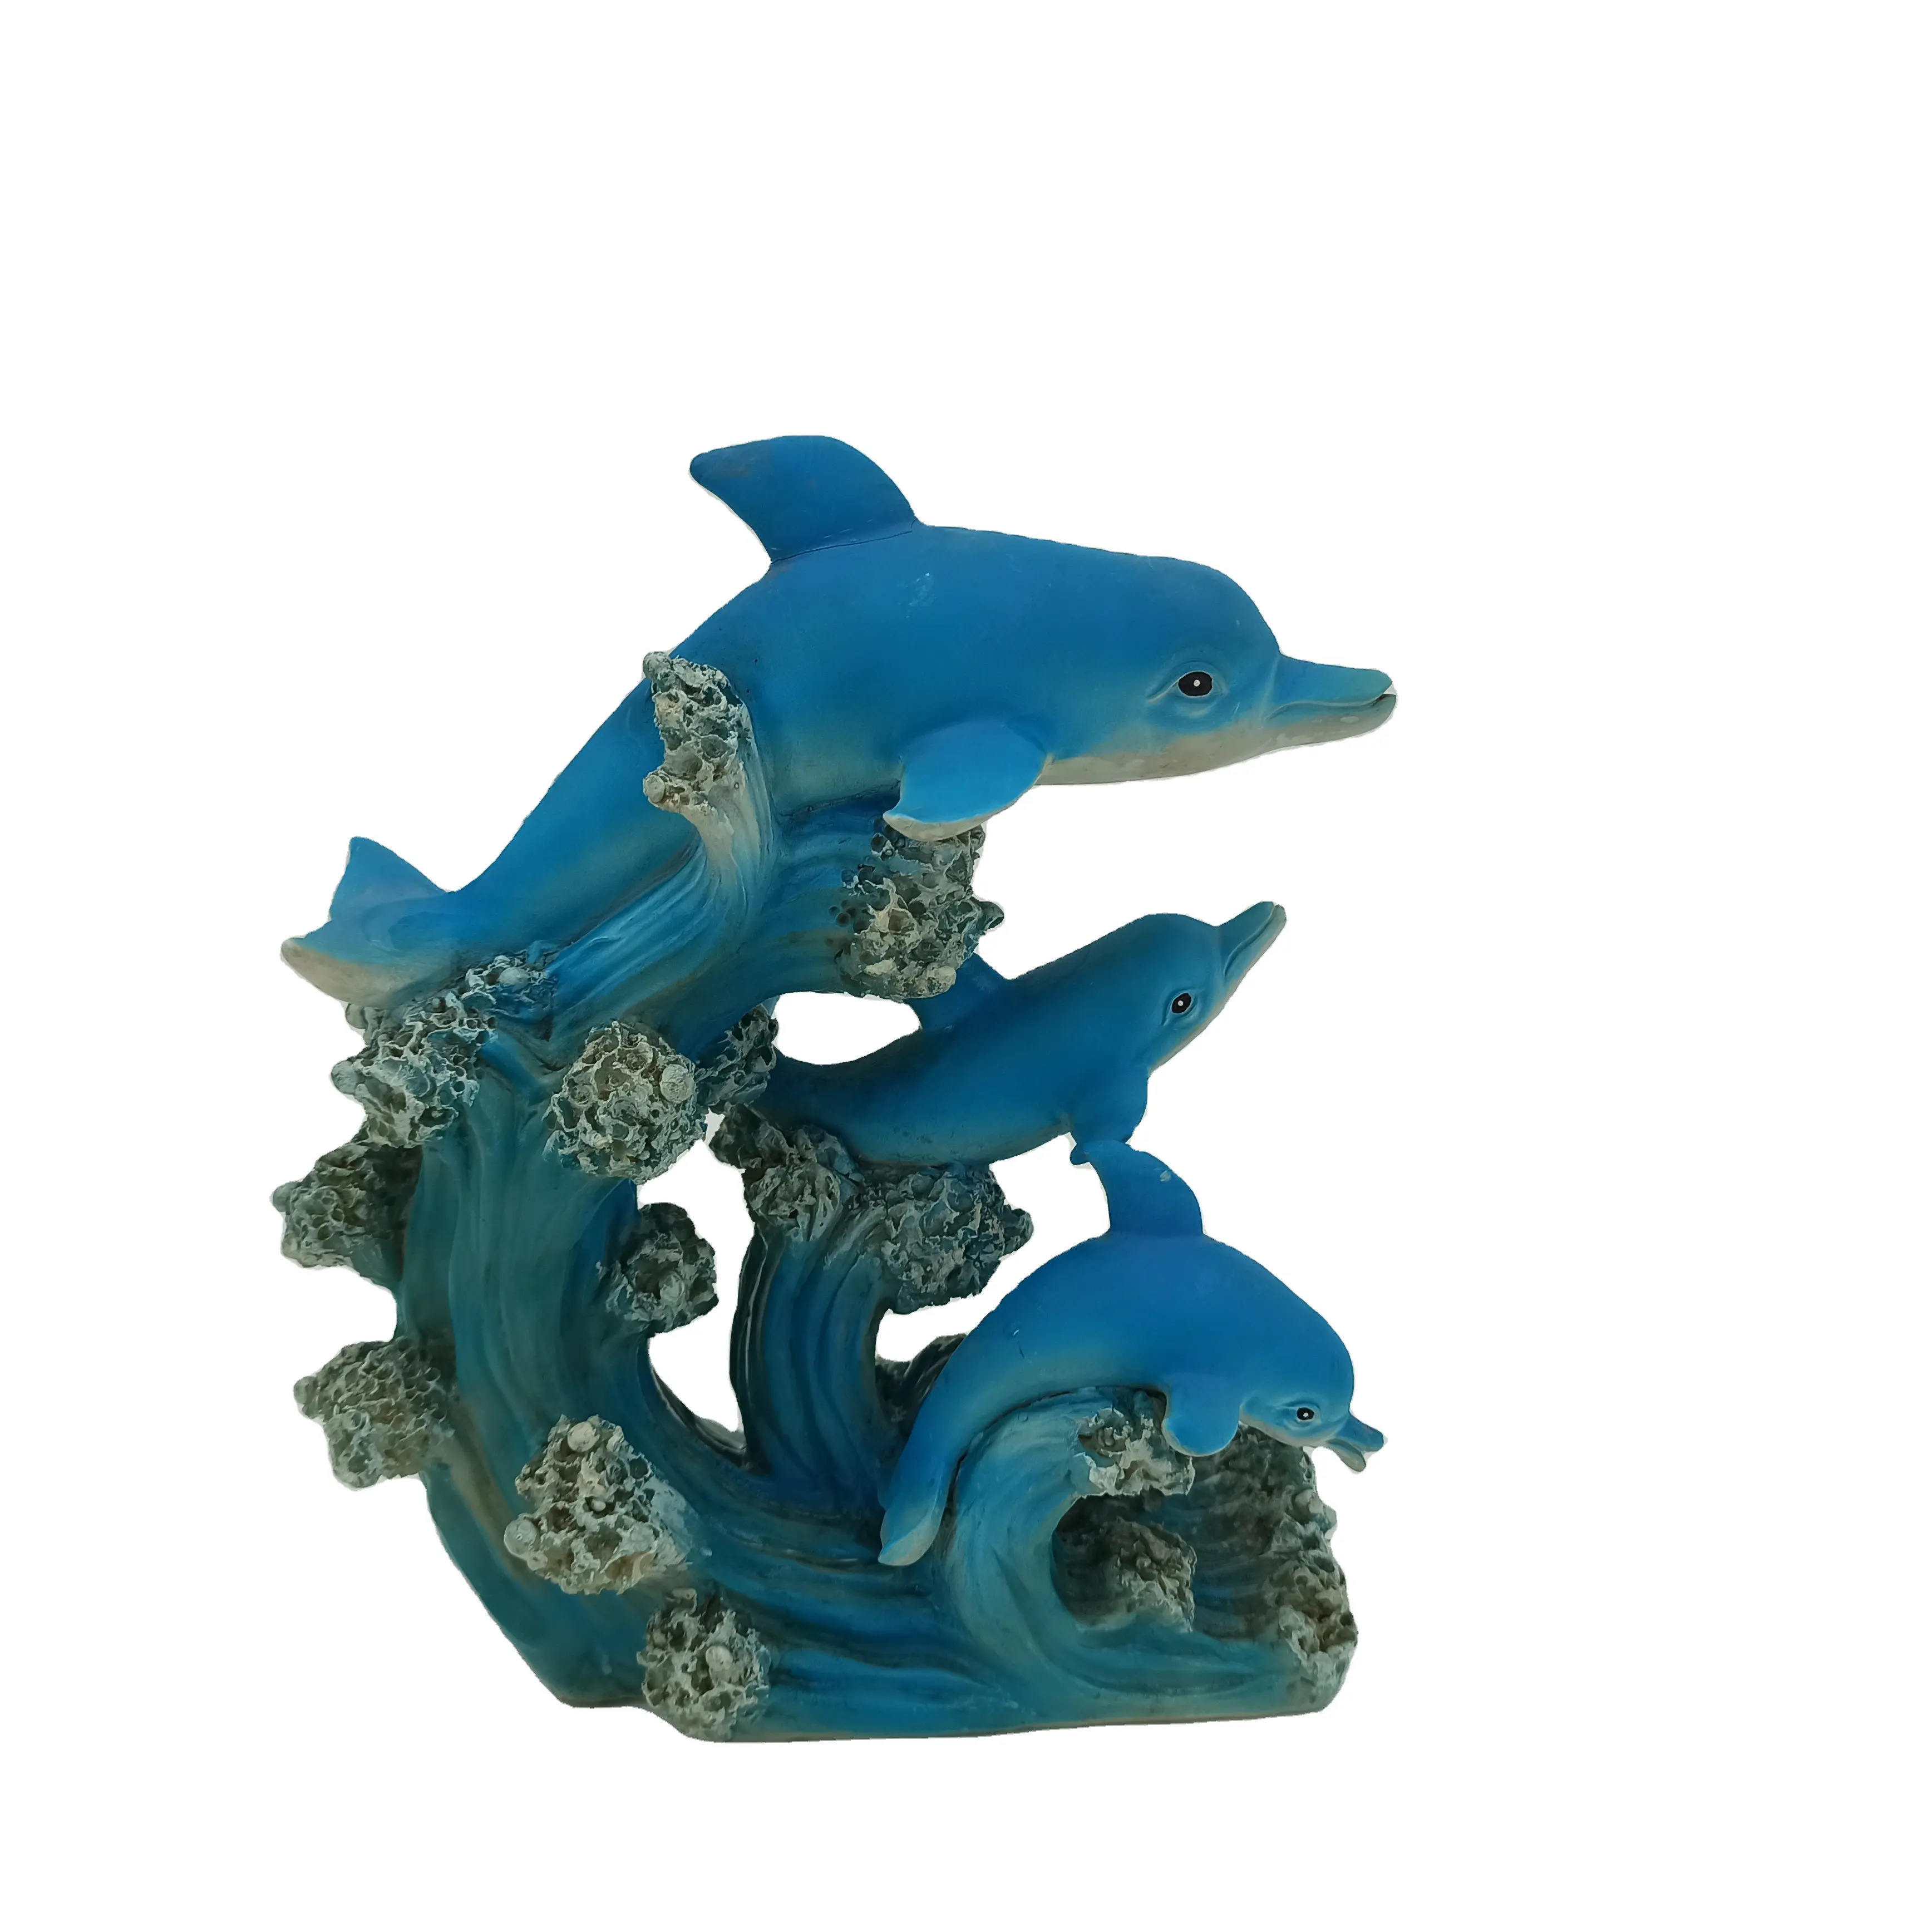 Nautical Style Resin Craft Marine Animal Statue of Dolphin Manufacturer Supply OEM&ODM Home Decor and Gift